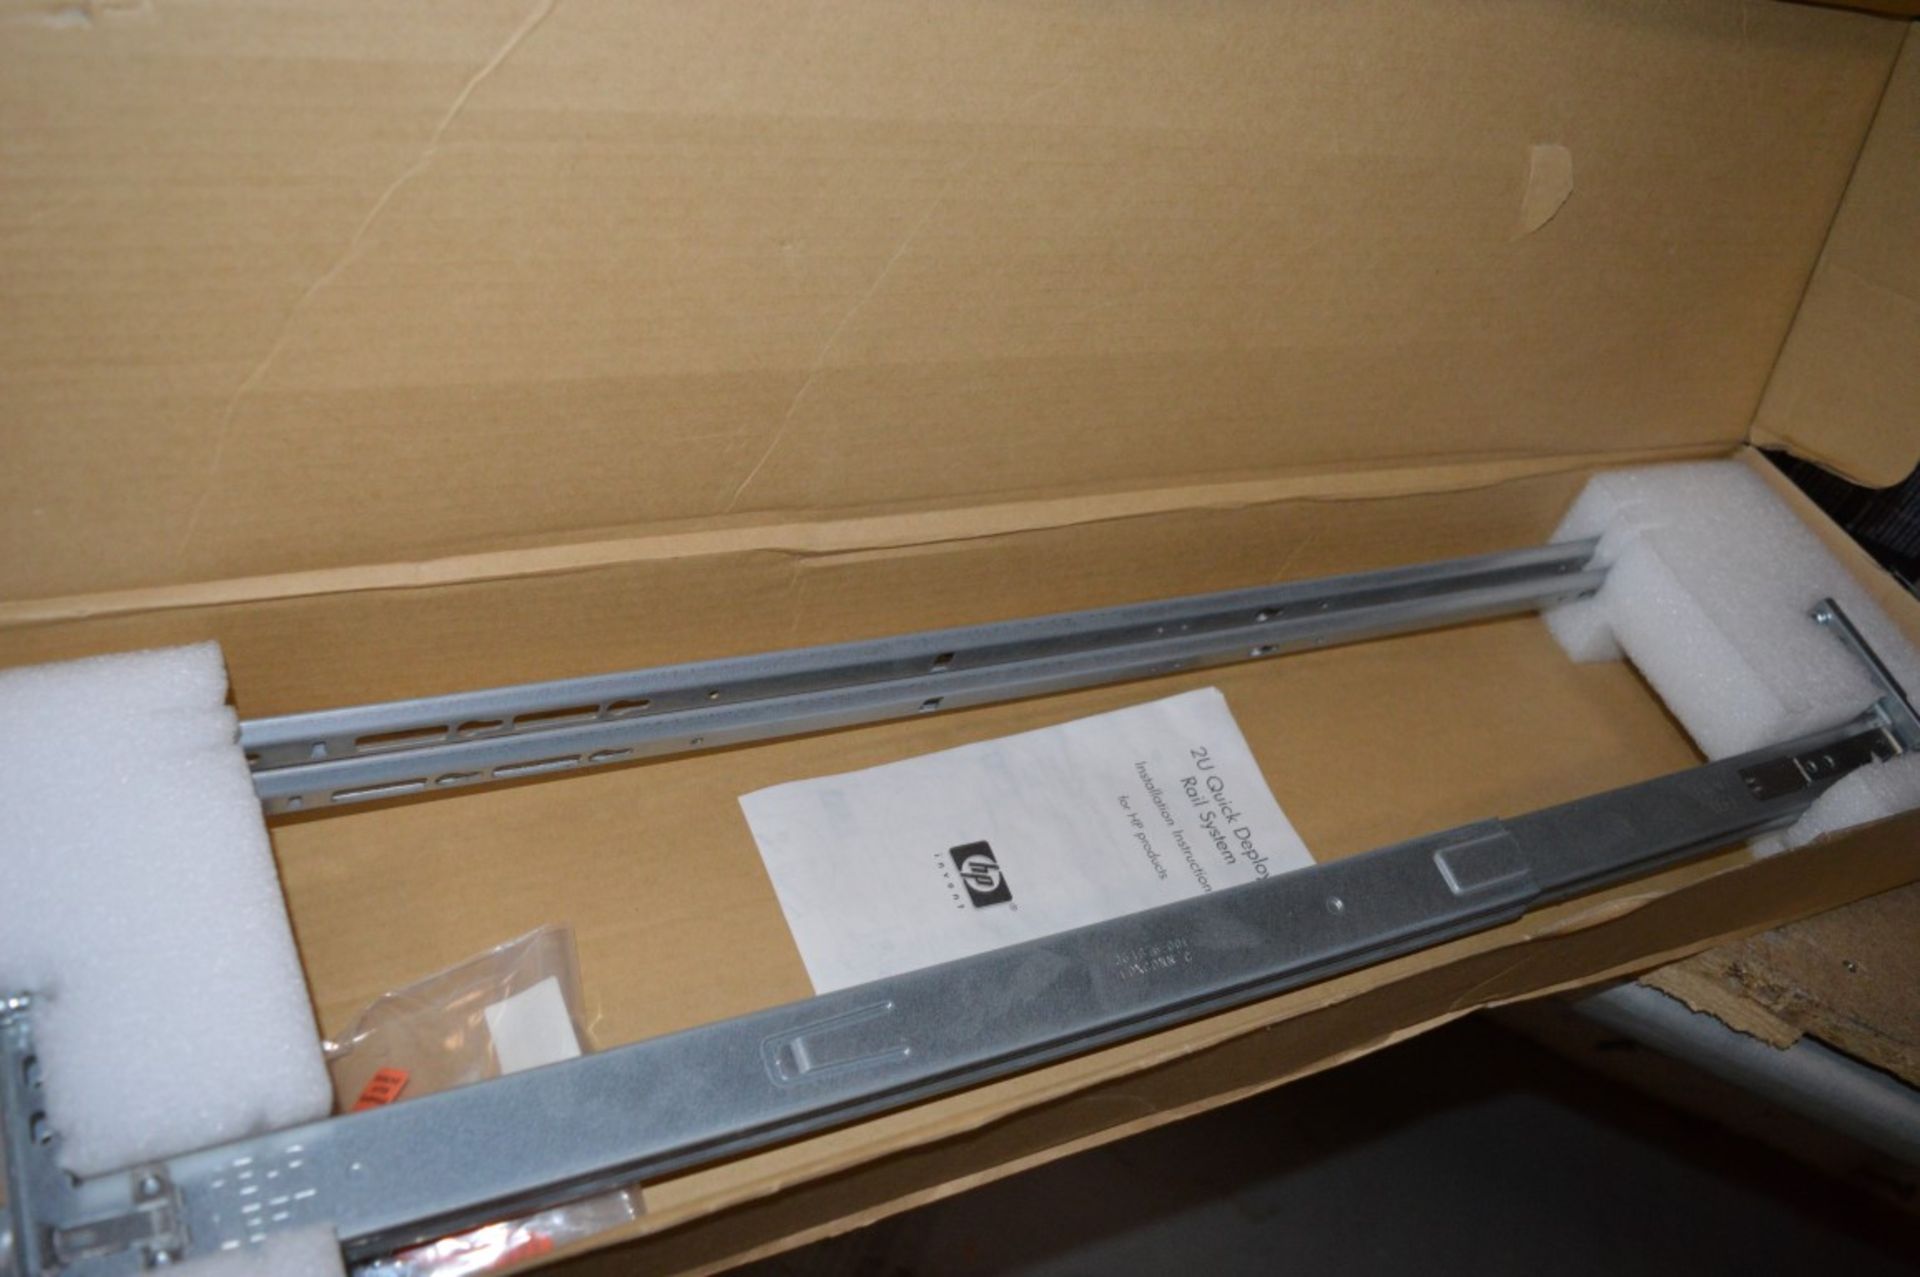 1 x HP 2U Quick Deploy Rail System For HP Servers - Part Number 360322-503 - Unused Stock in